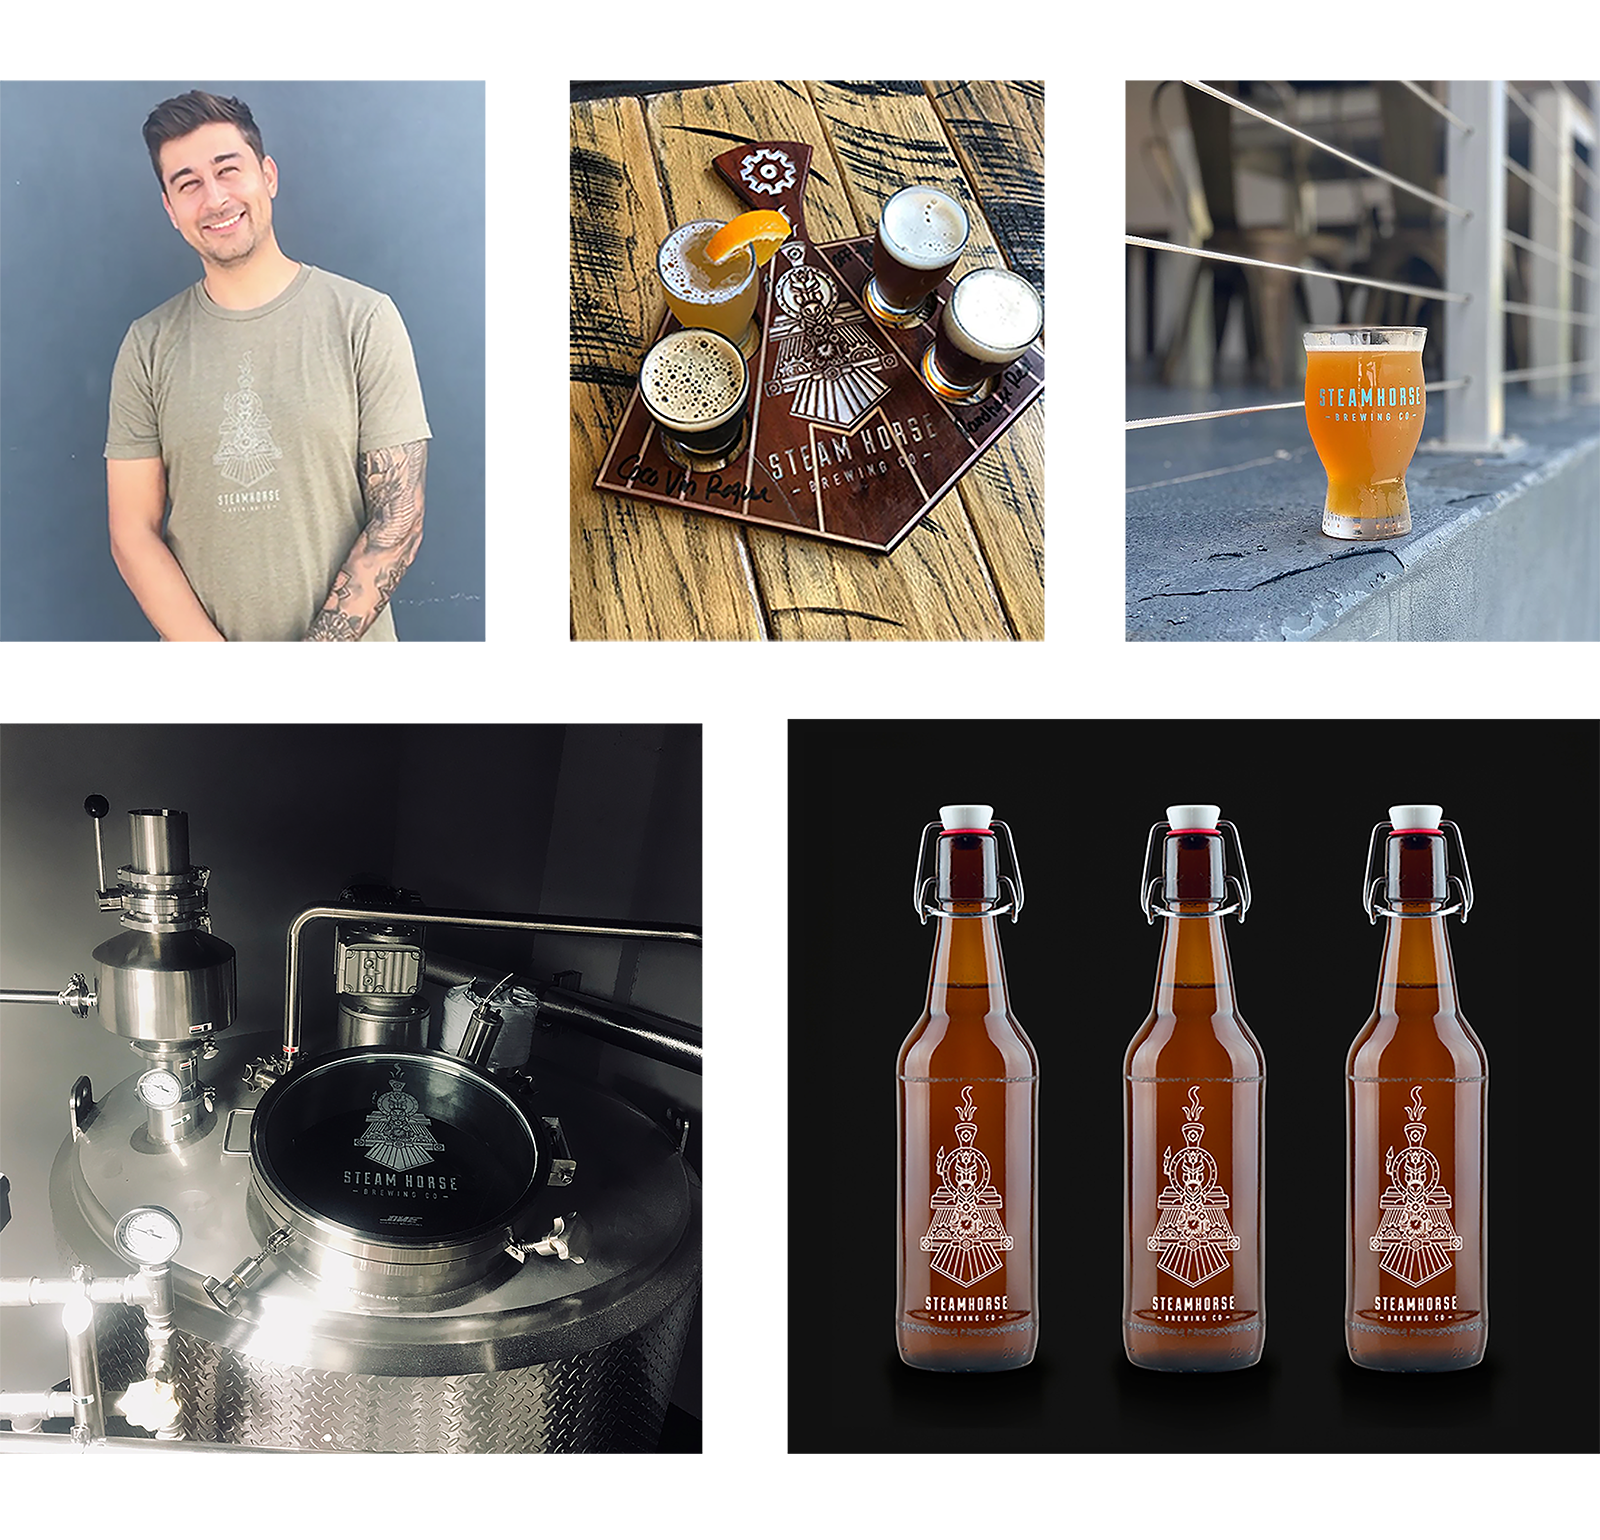 Collage of Steam Horse Brewing Co branding featured on beer bottles, glassware, a wooden beer flight board and a industrial brewing machine.